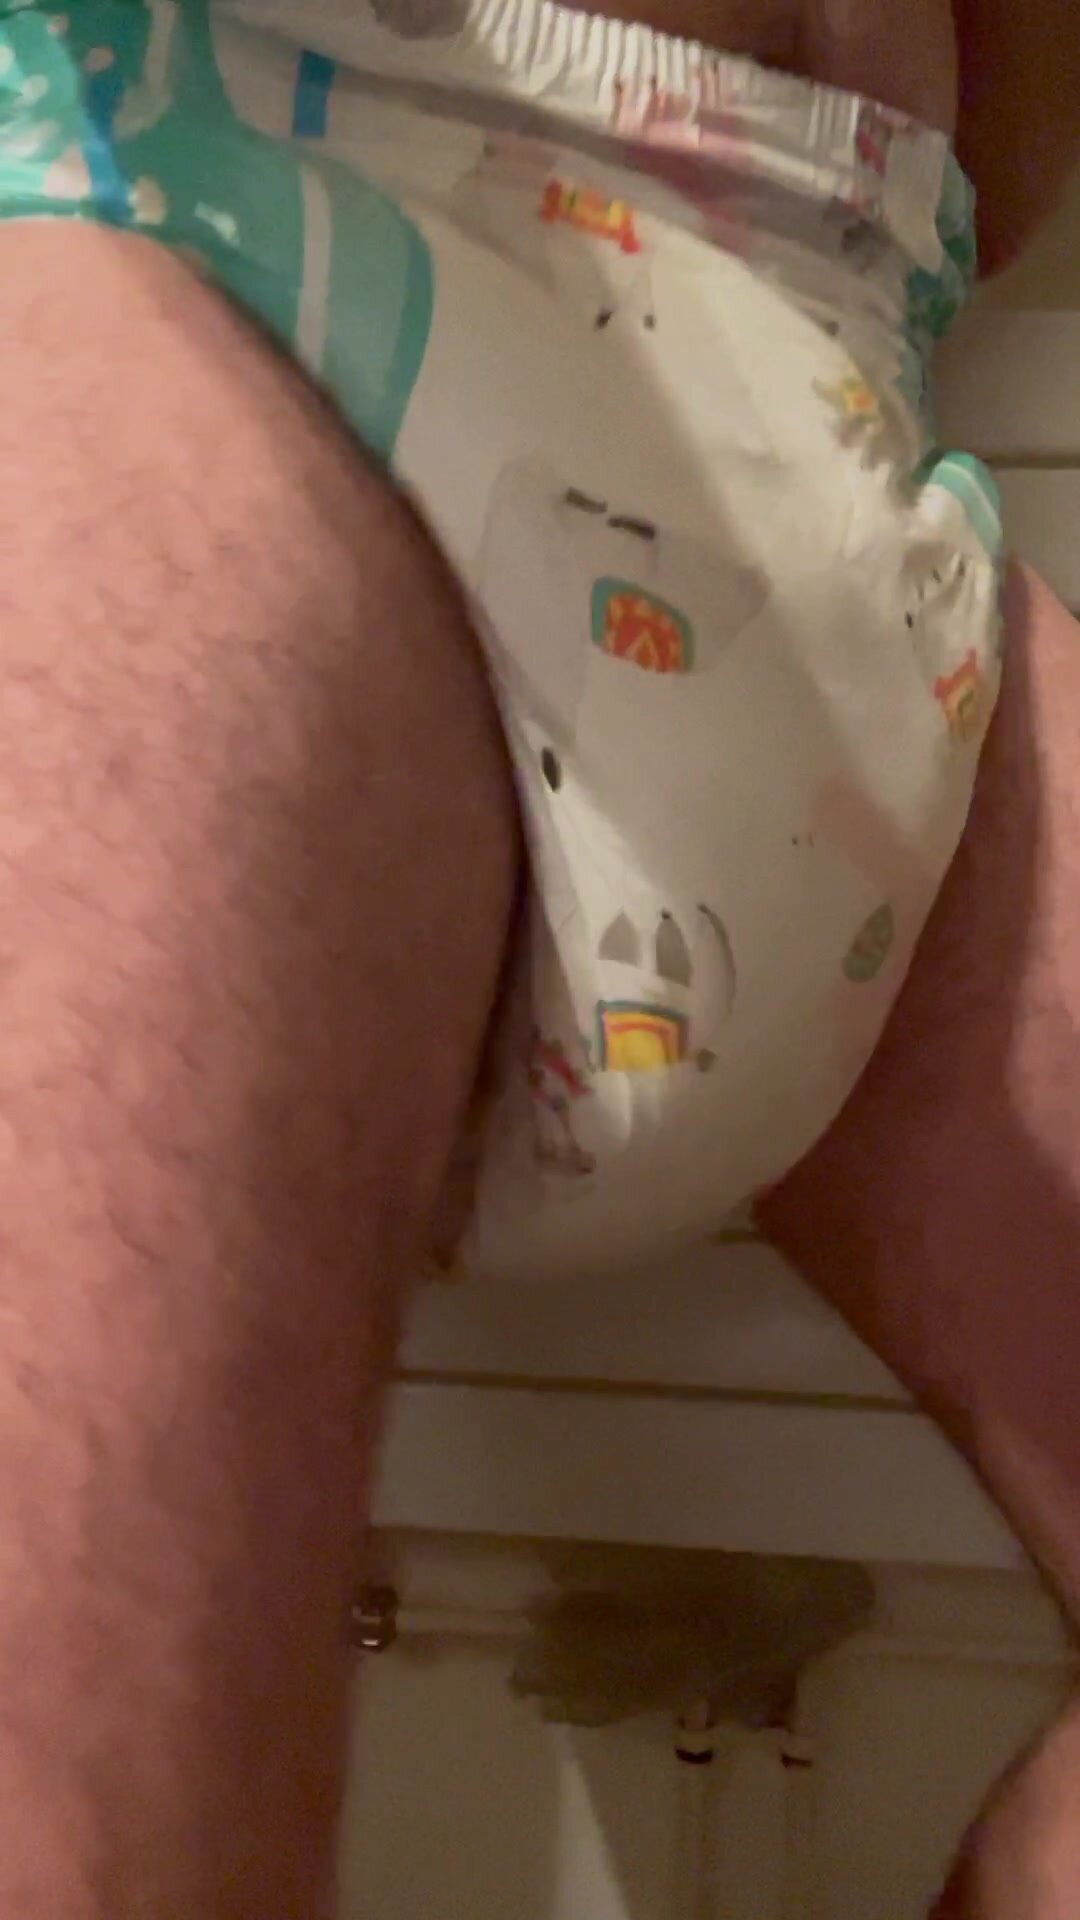 Shaking diapers